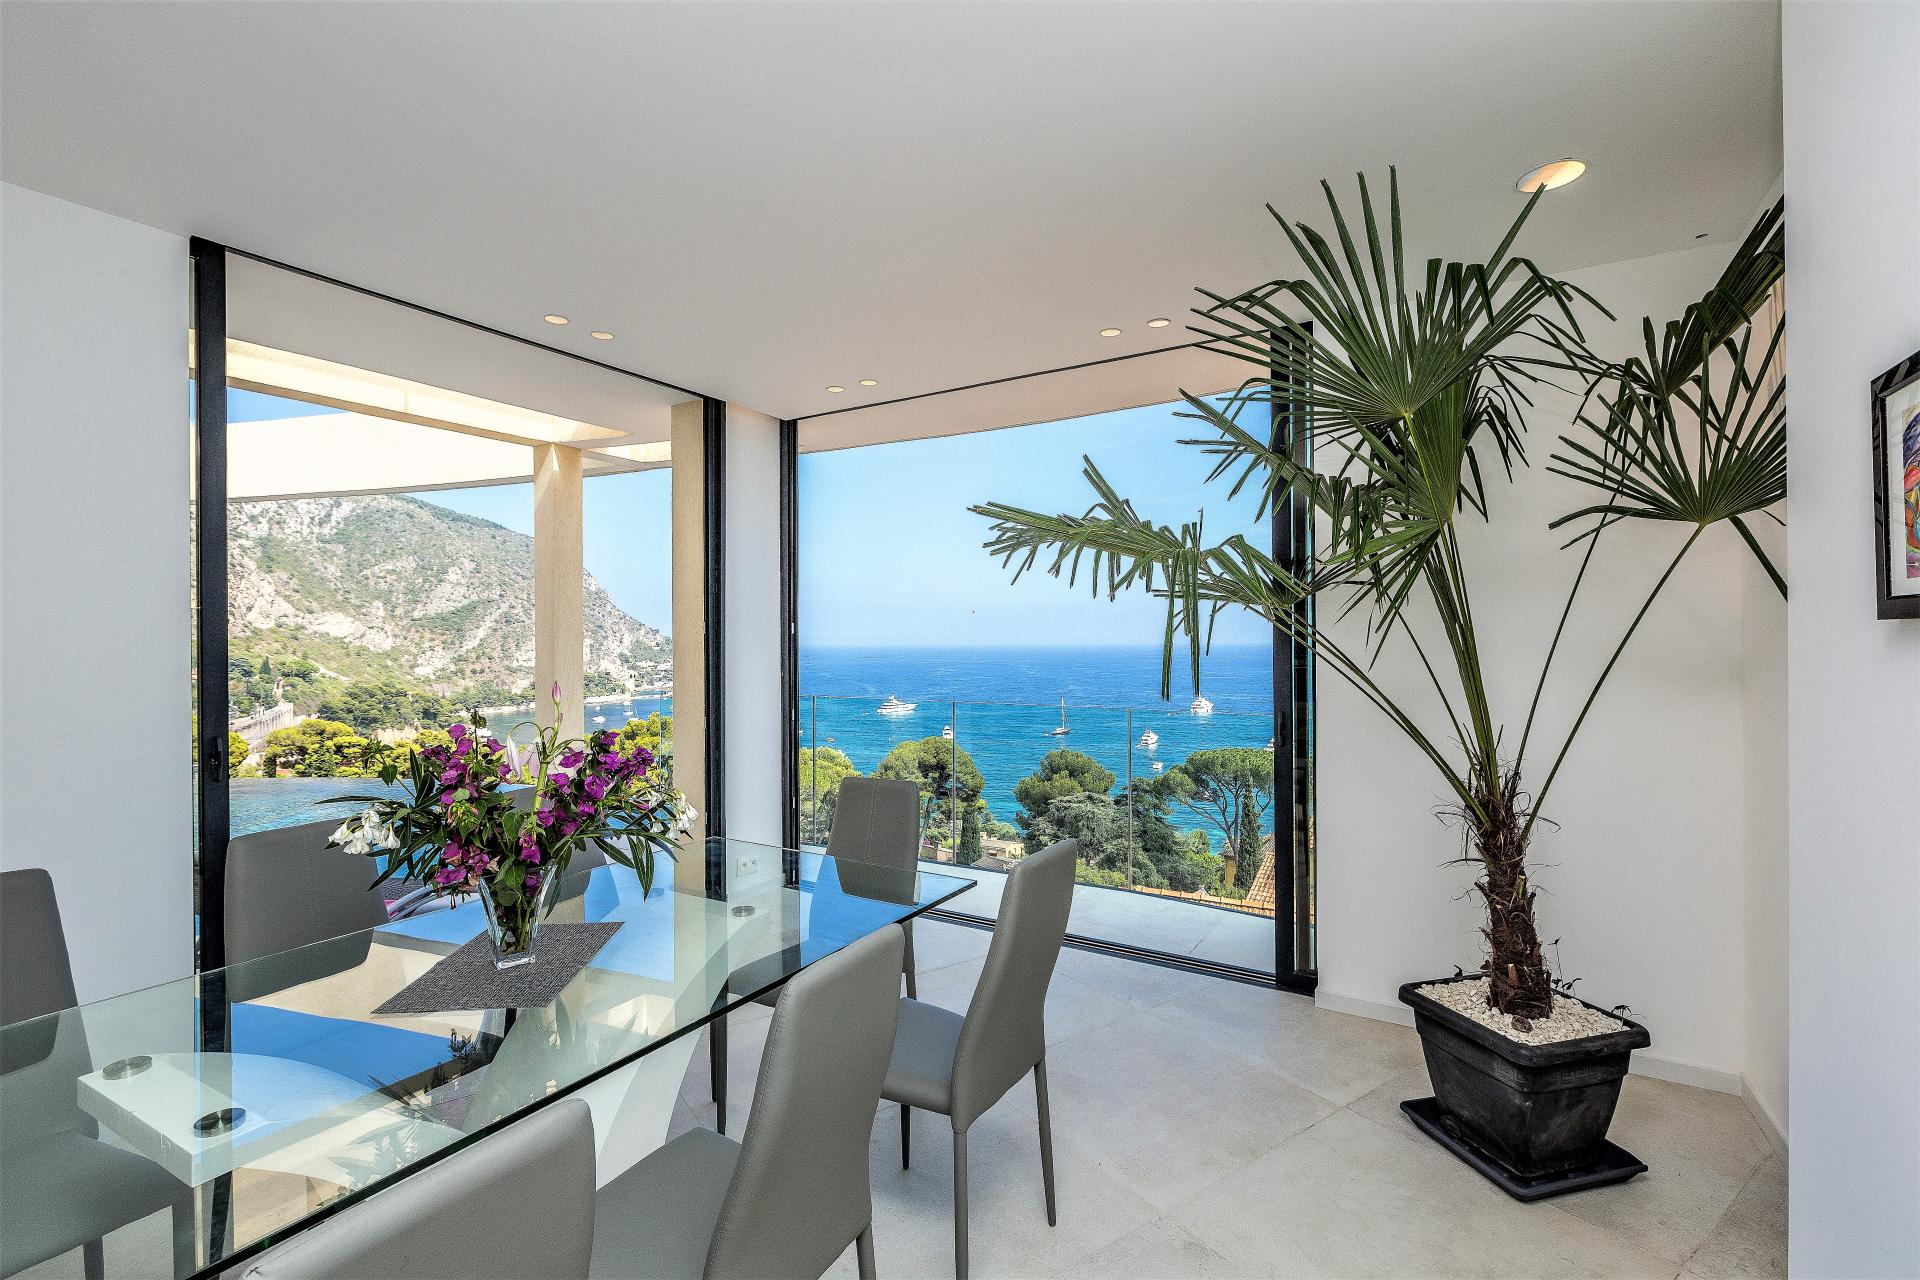 GREAT SEA VIEWS FROM A HOLIDAY VILLA IN EZE